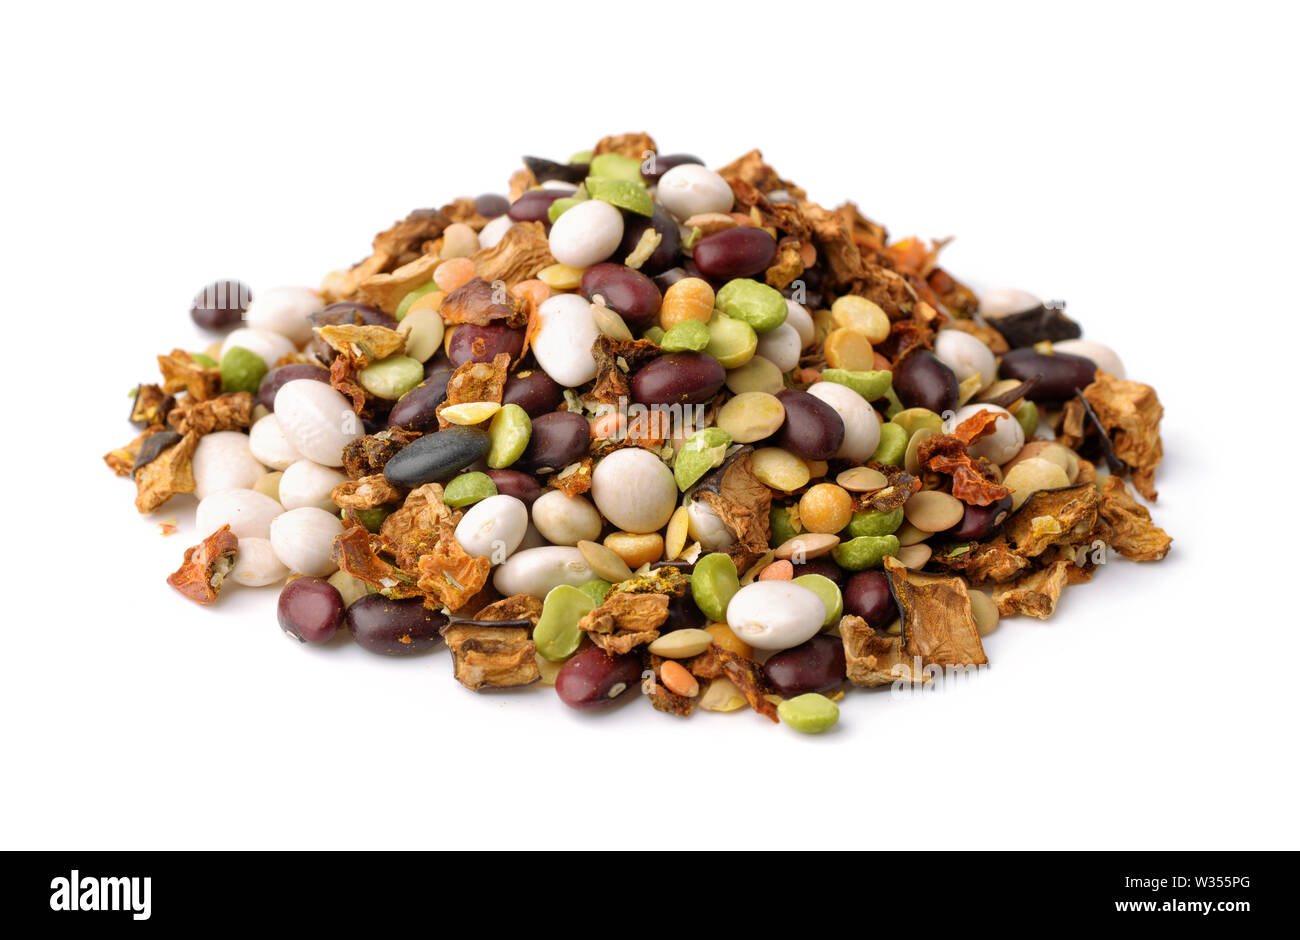 Pile of dry beans and vegetables soup mix isolated on white Stock Photo